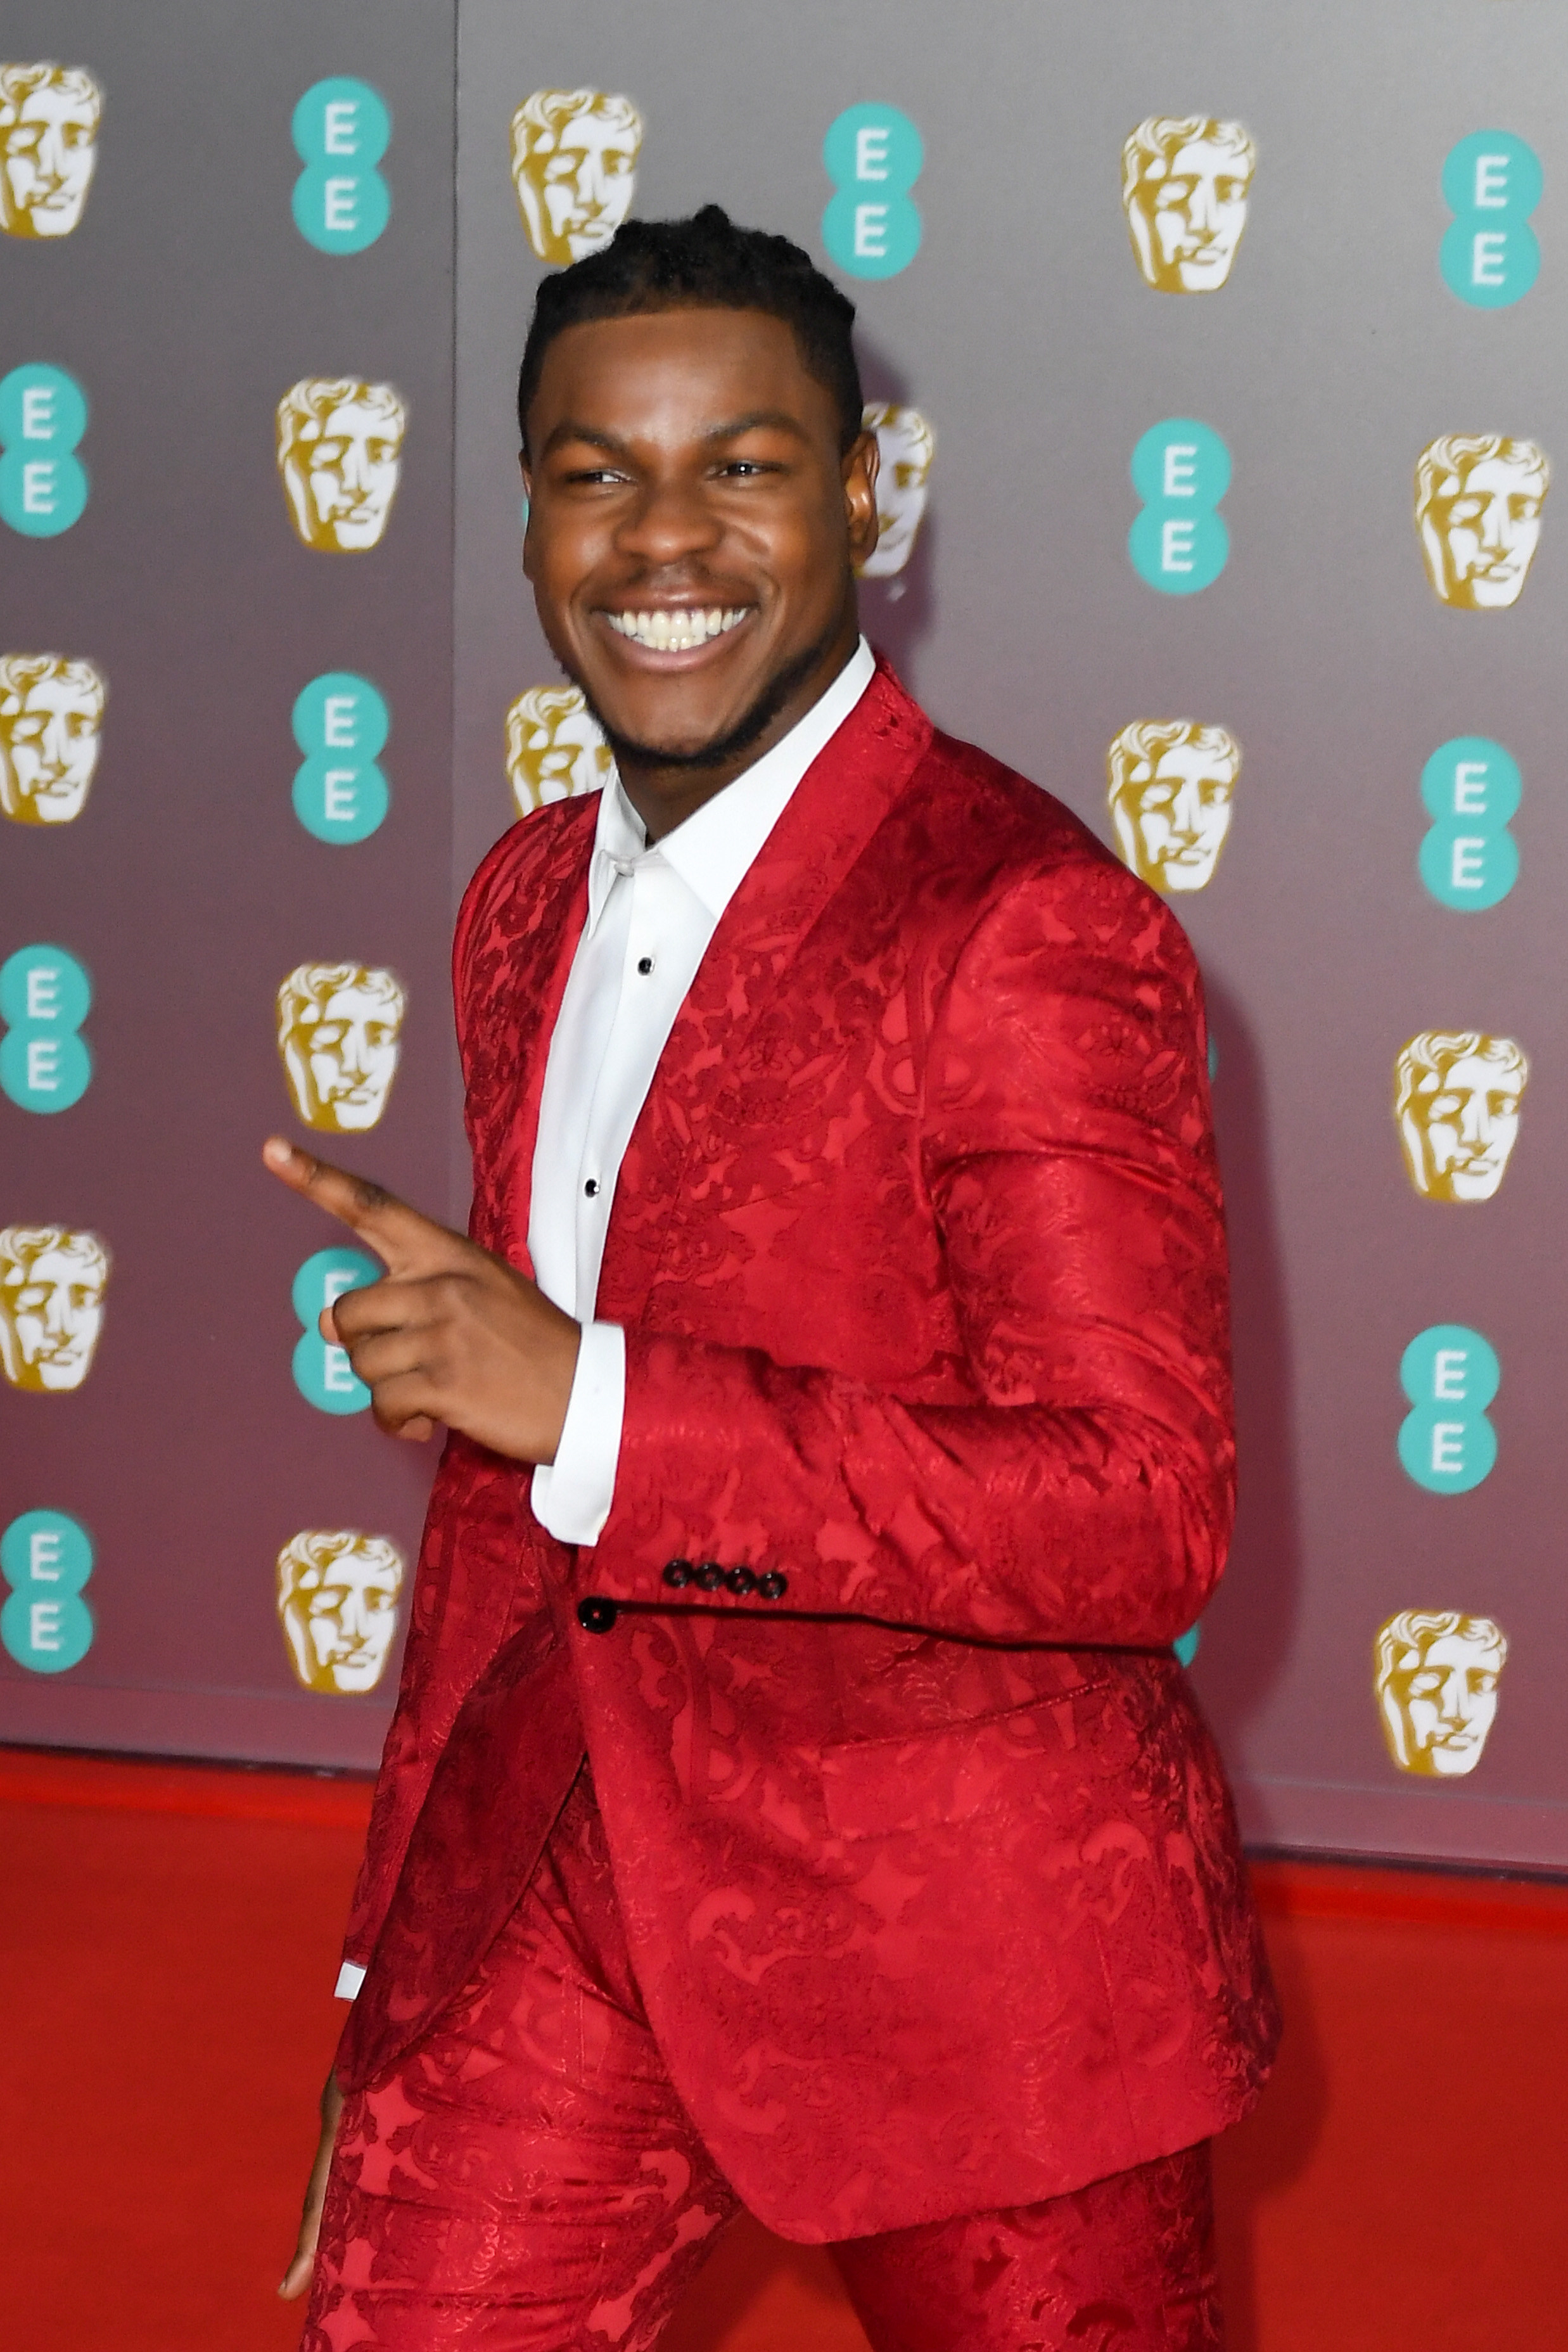 close up of Boyega on the red carpet in a suit smiling